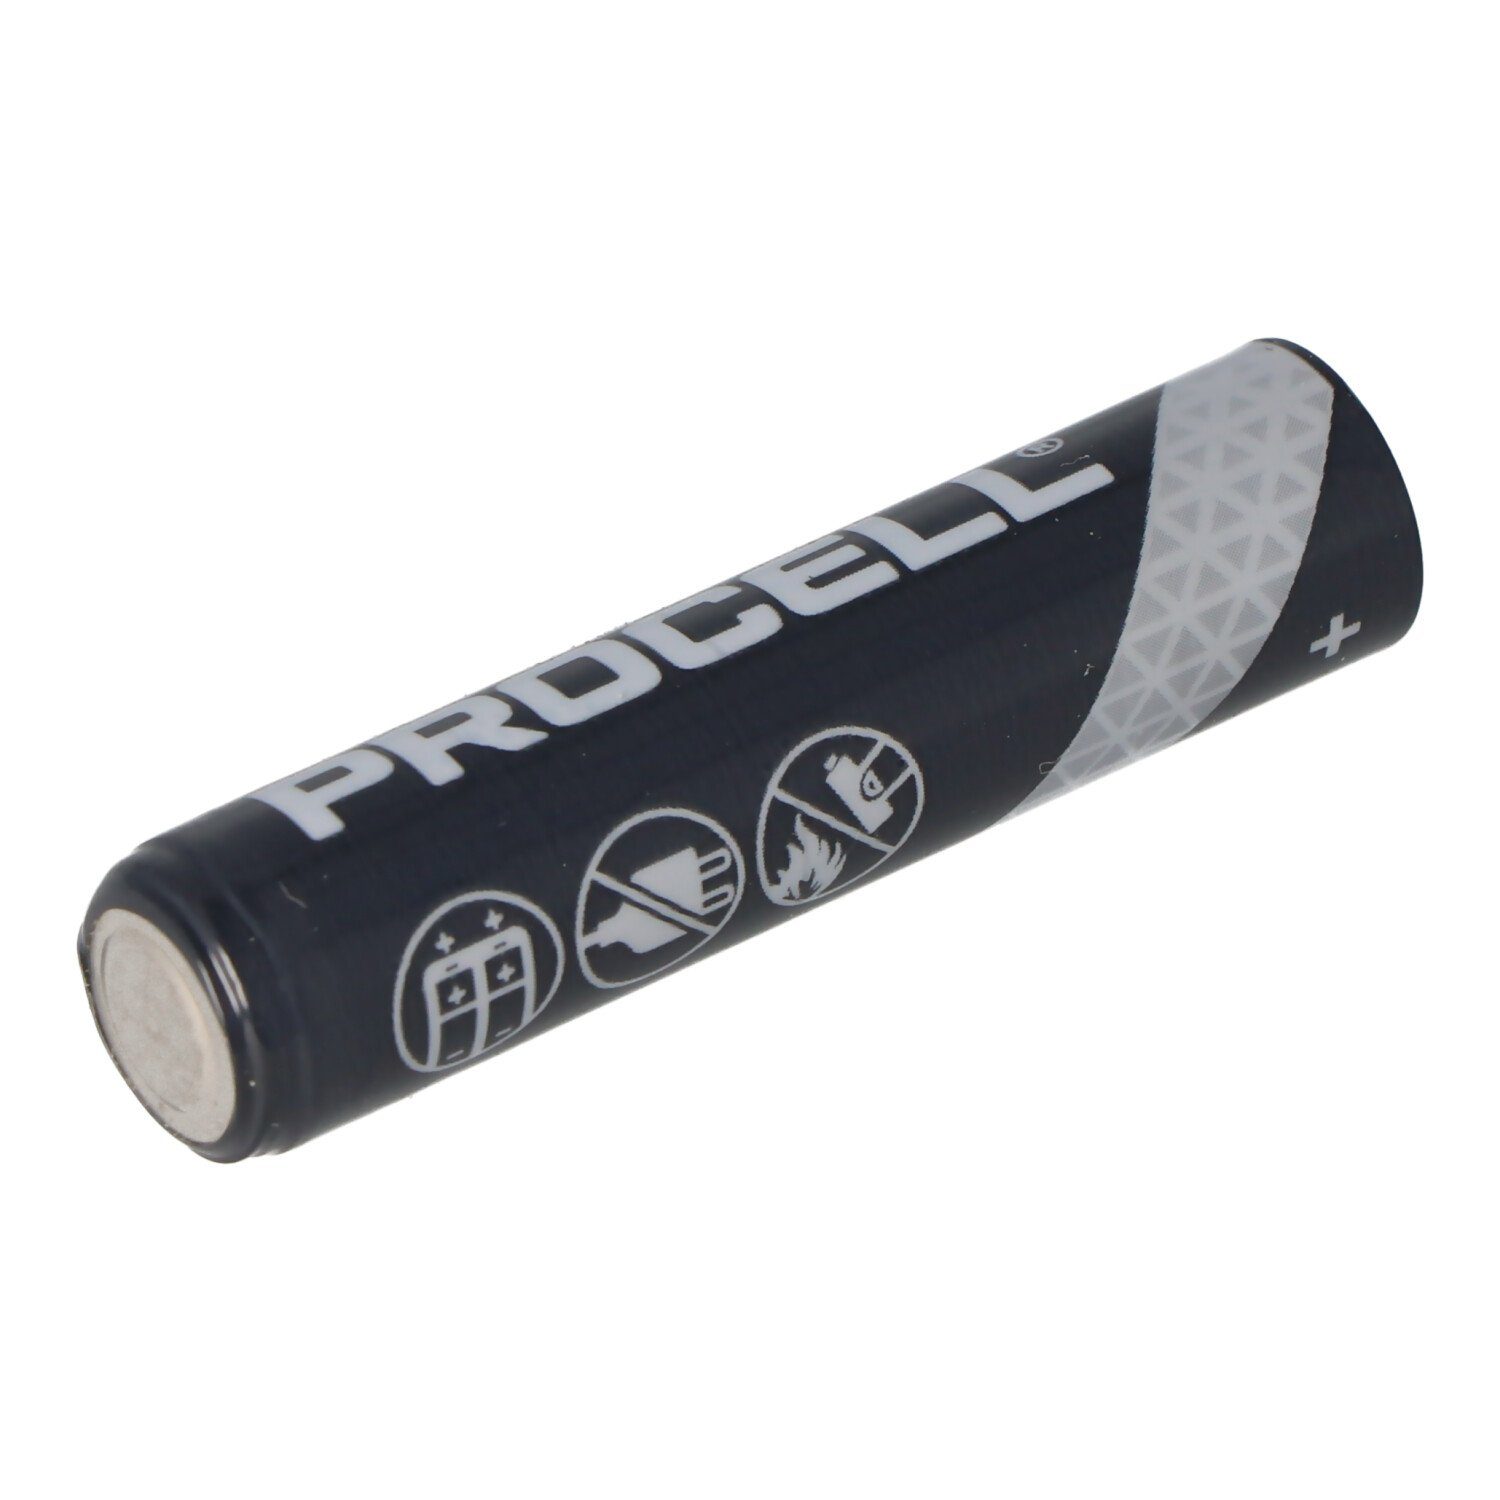 Micro, V) AAA Duracell LR03 Alkaline Ware (1,5 Duracell 1 Procell Batterie, lose Stück